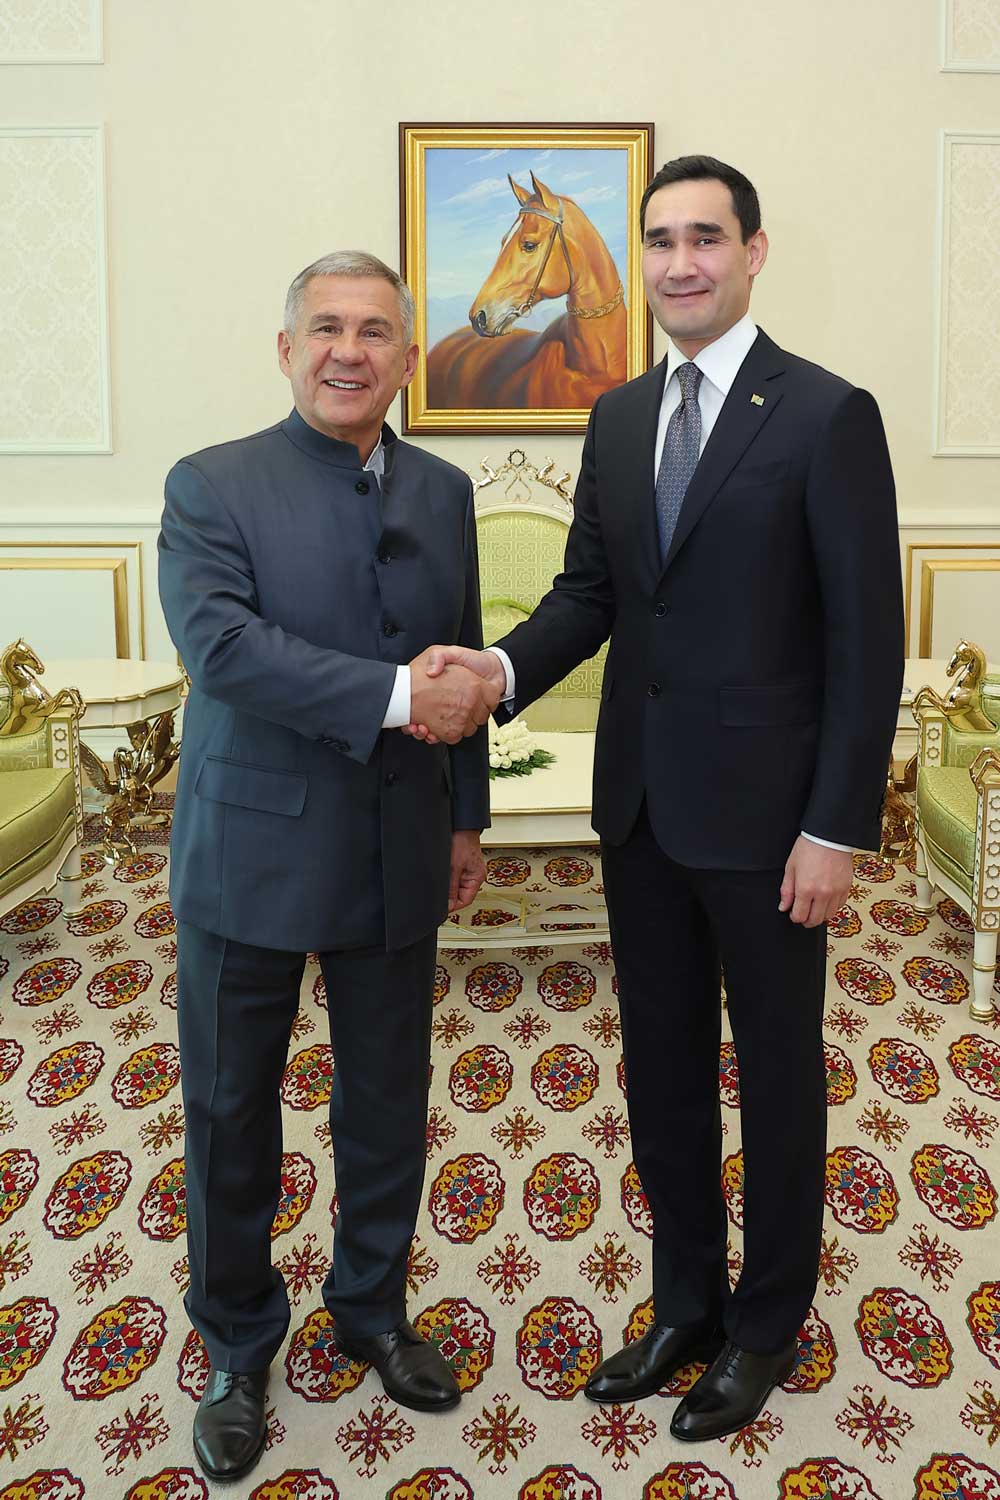 Meeting of the President of Turkmenistan and Rais of the Republic of Tatarstan of the Russian Federation